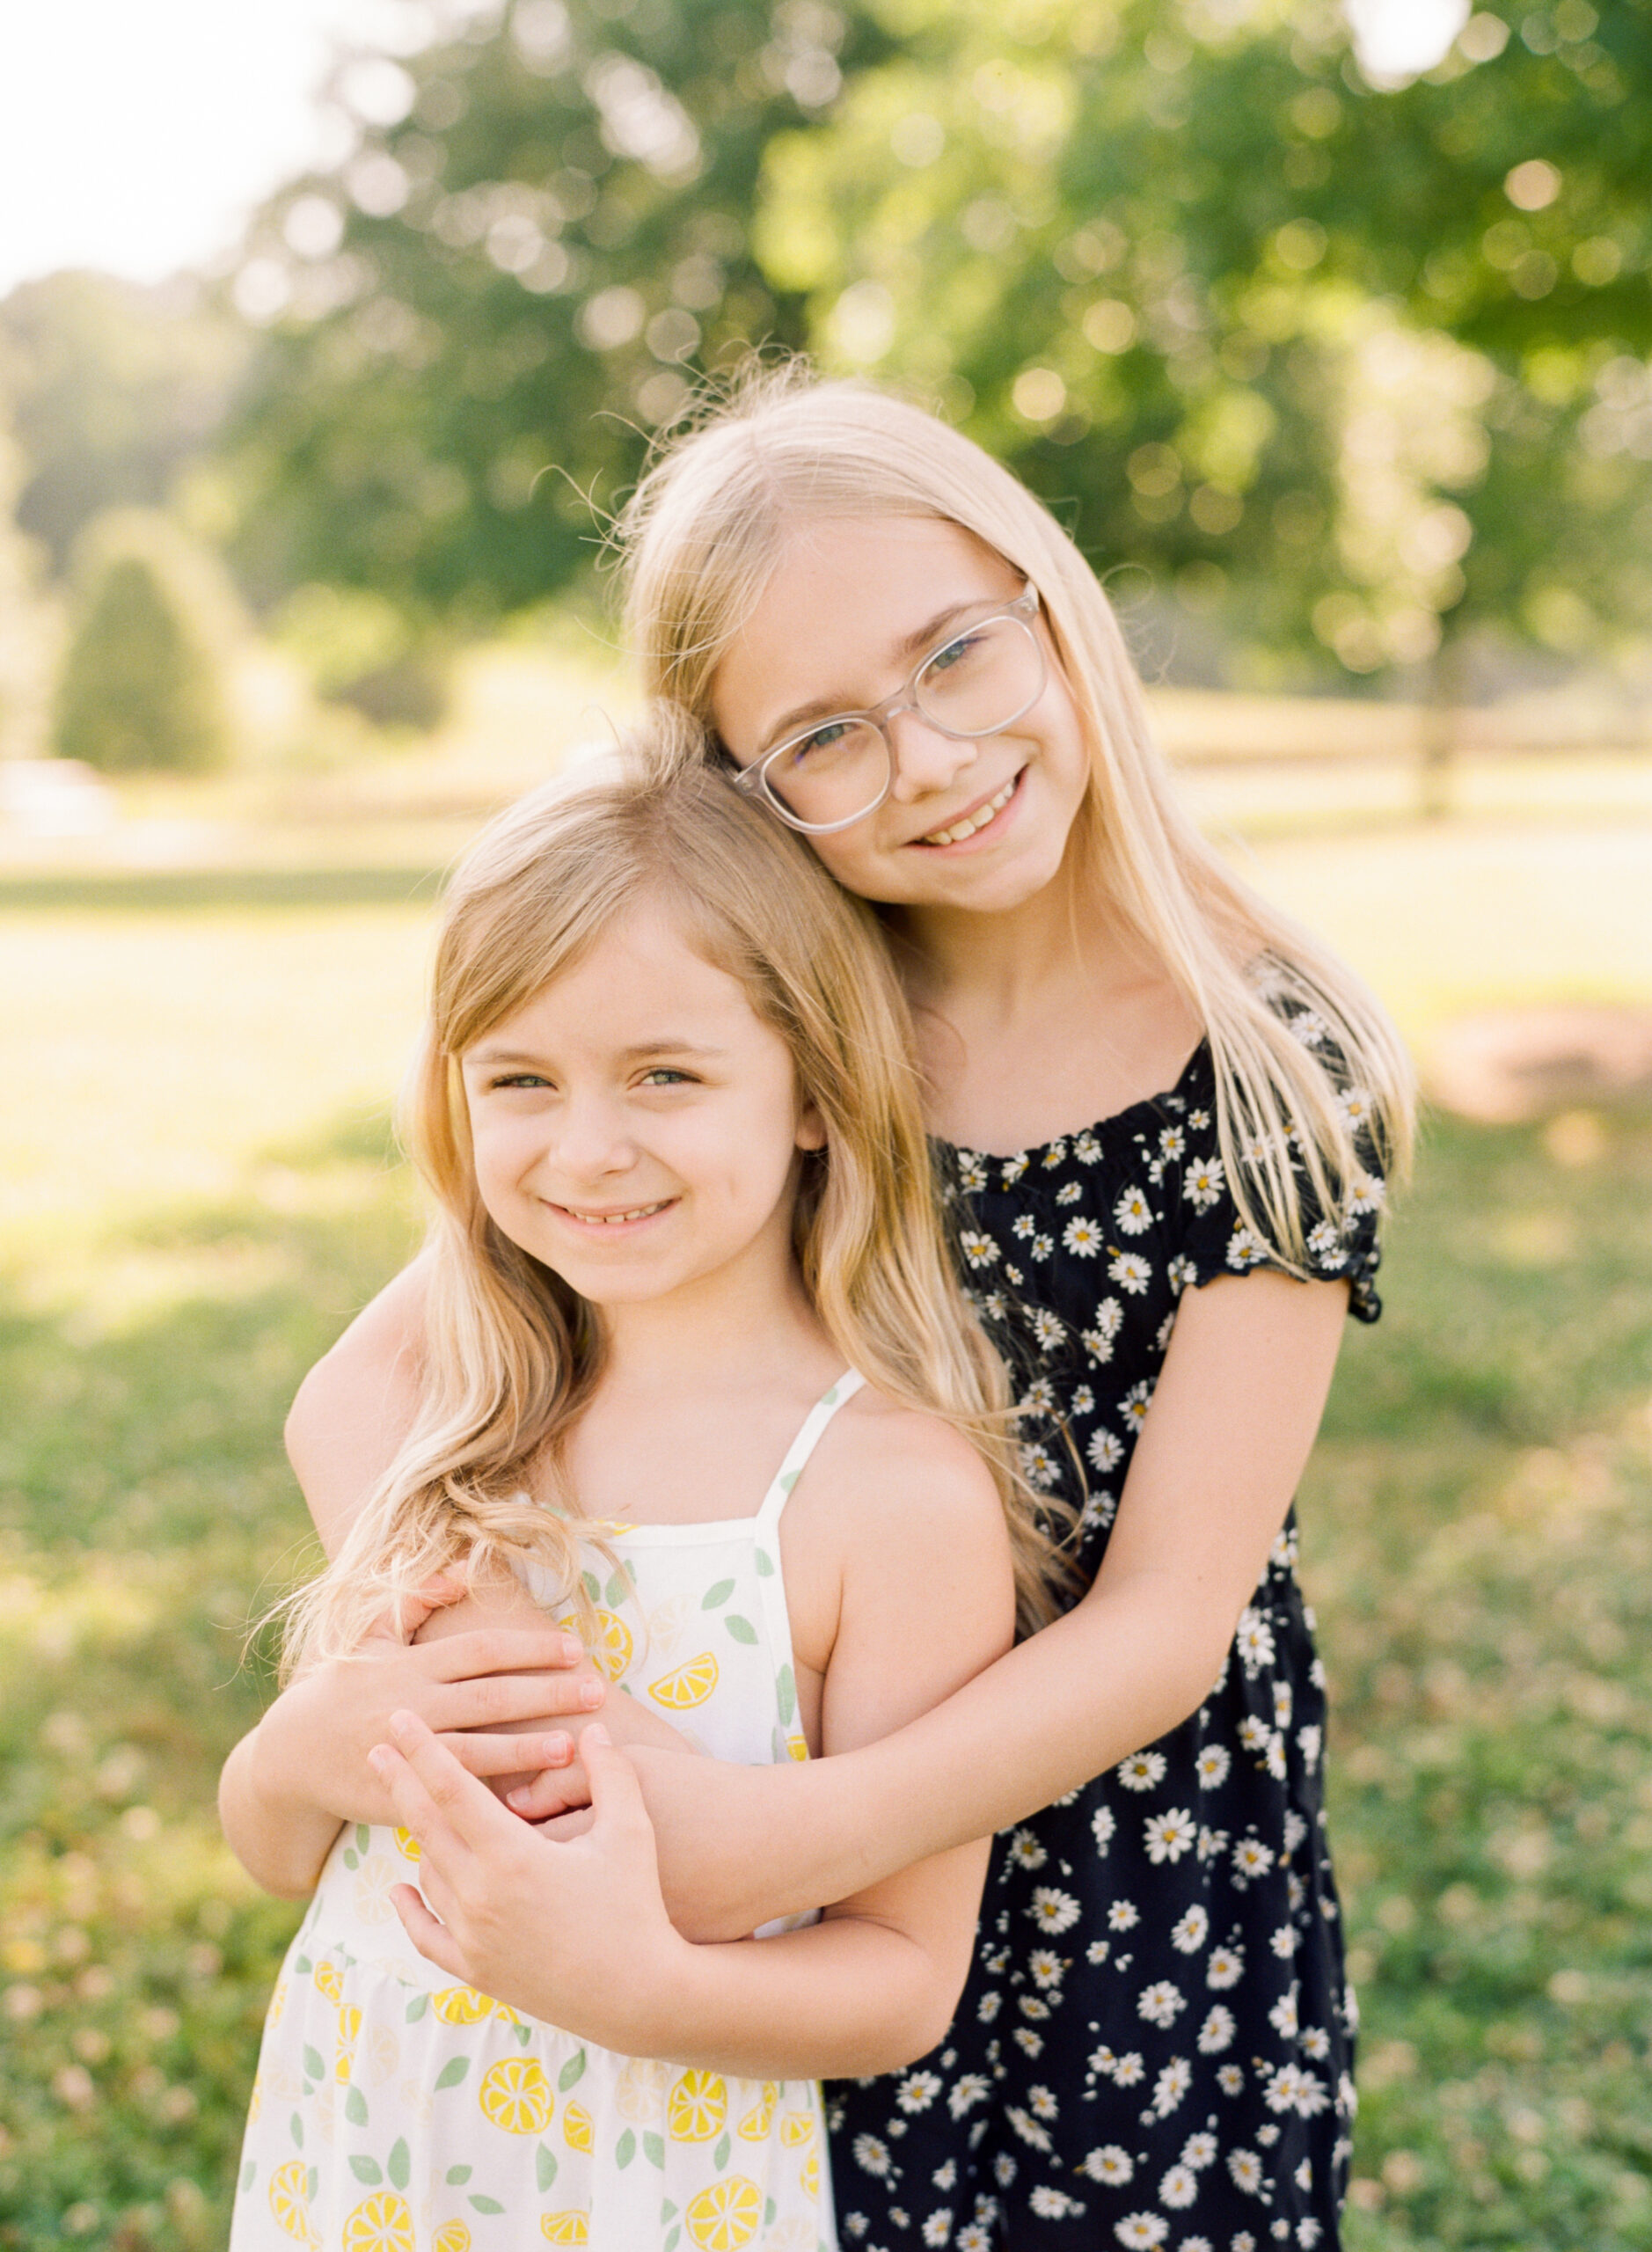 Sisters hug for a portrait at Joyner Park. Image by Wake Forest Family Photography photographer A.J. Dunlap.